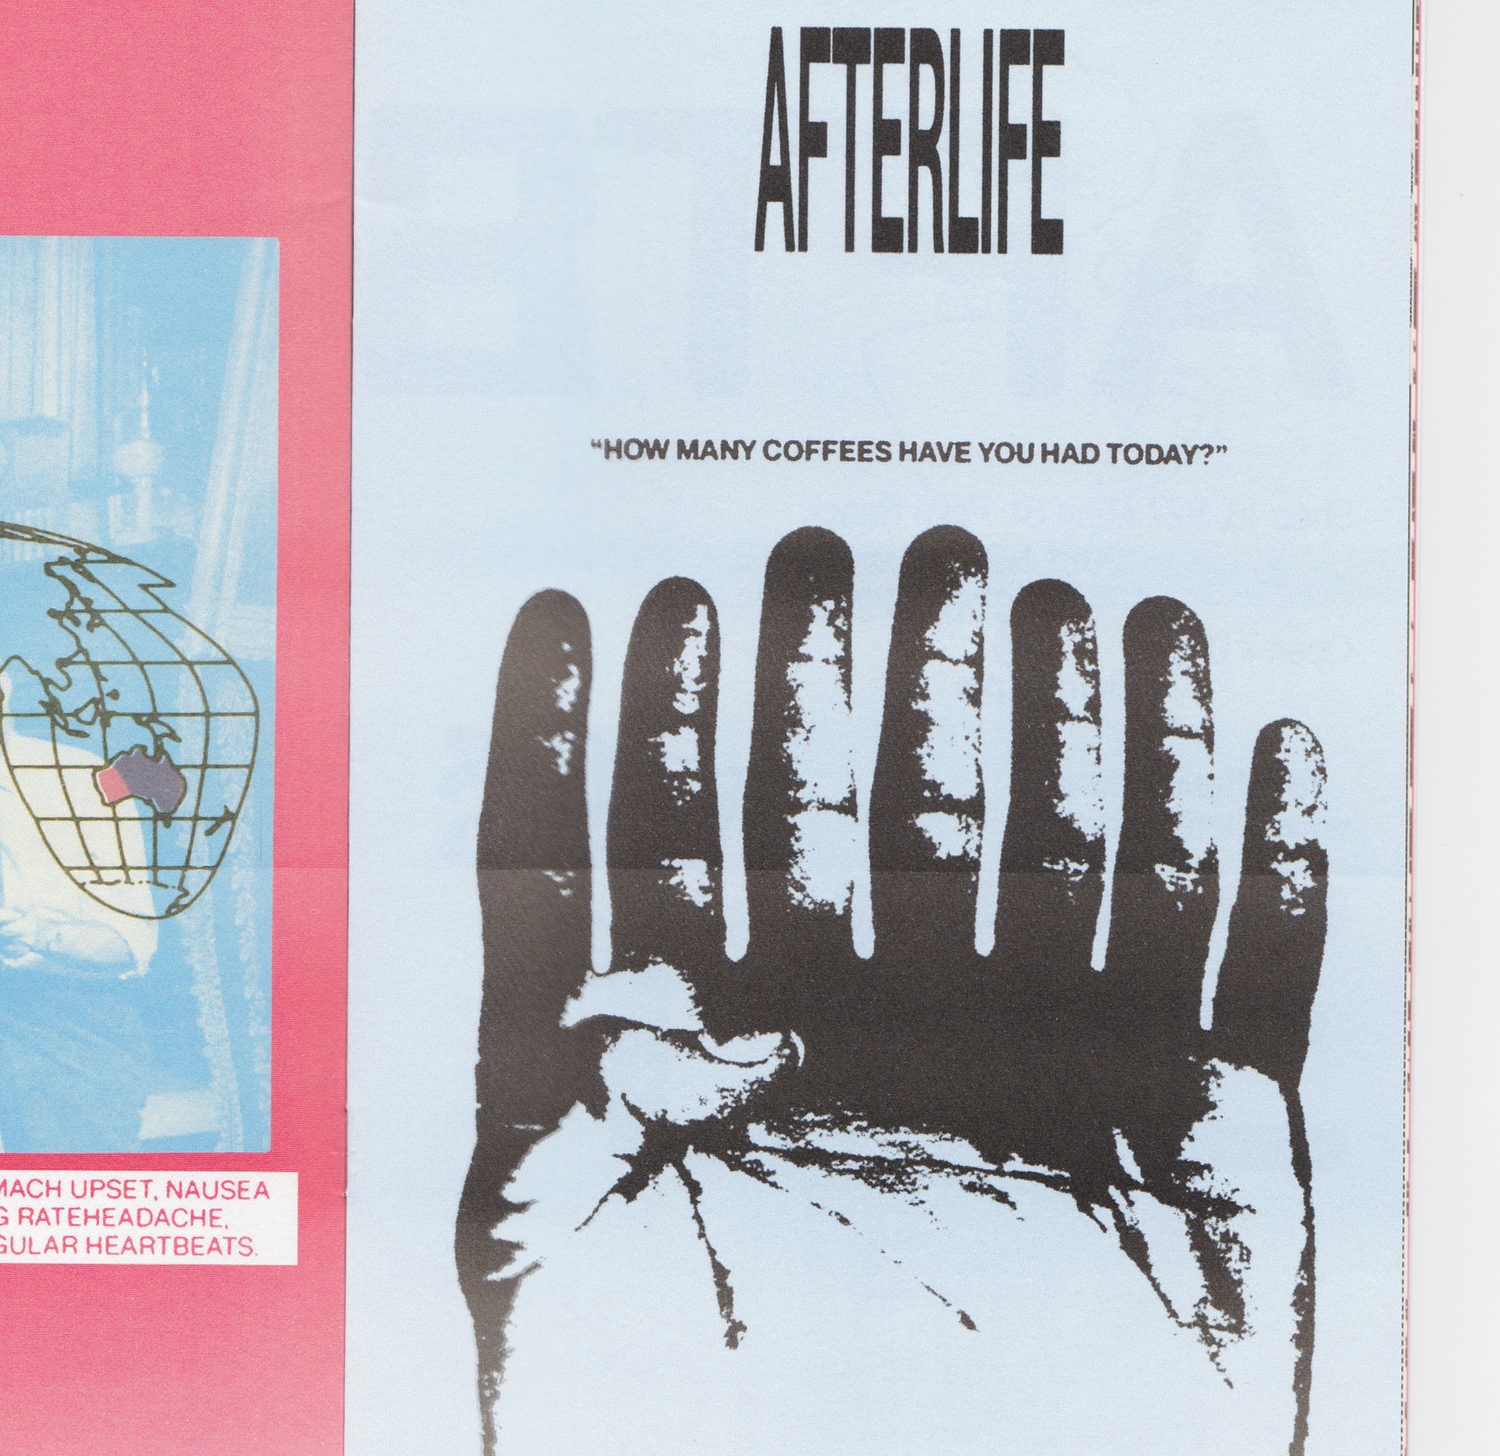 Afterlife - Design Graphic - seven fingers of coffee | Atollon - a design company